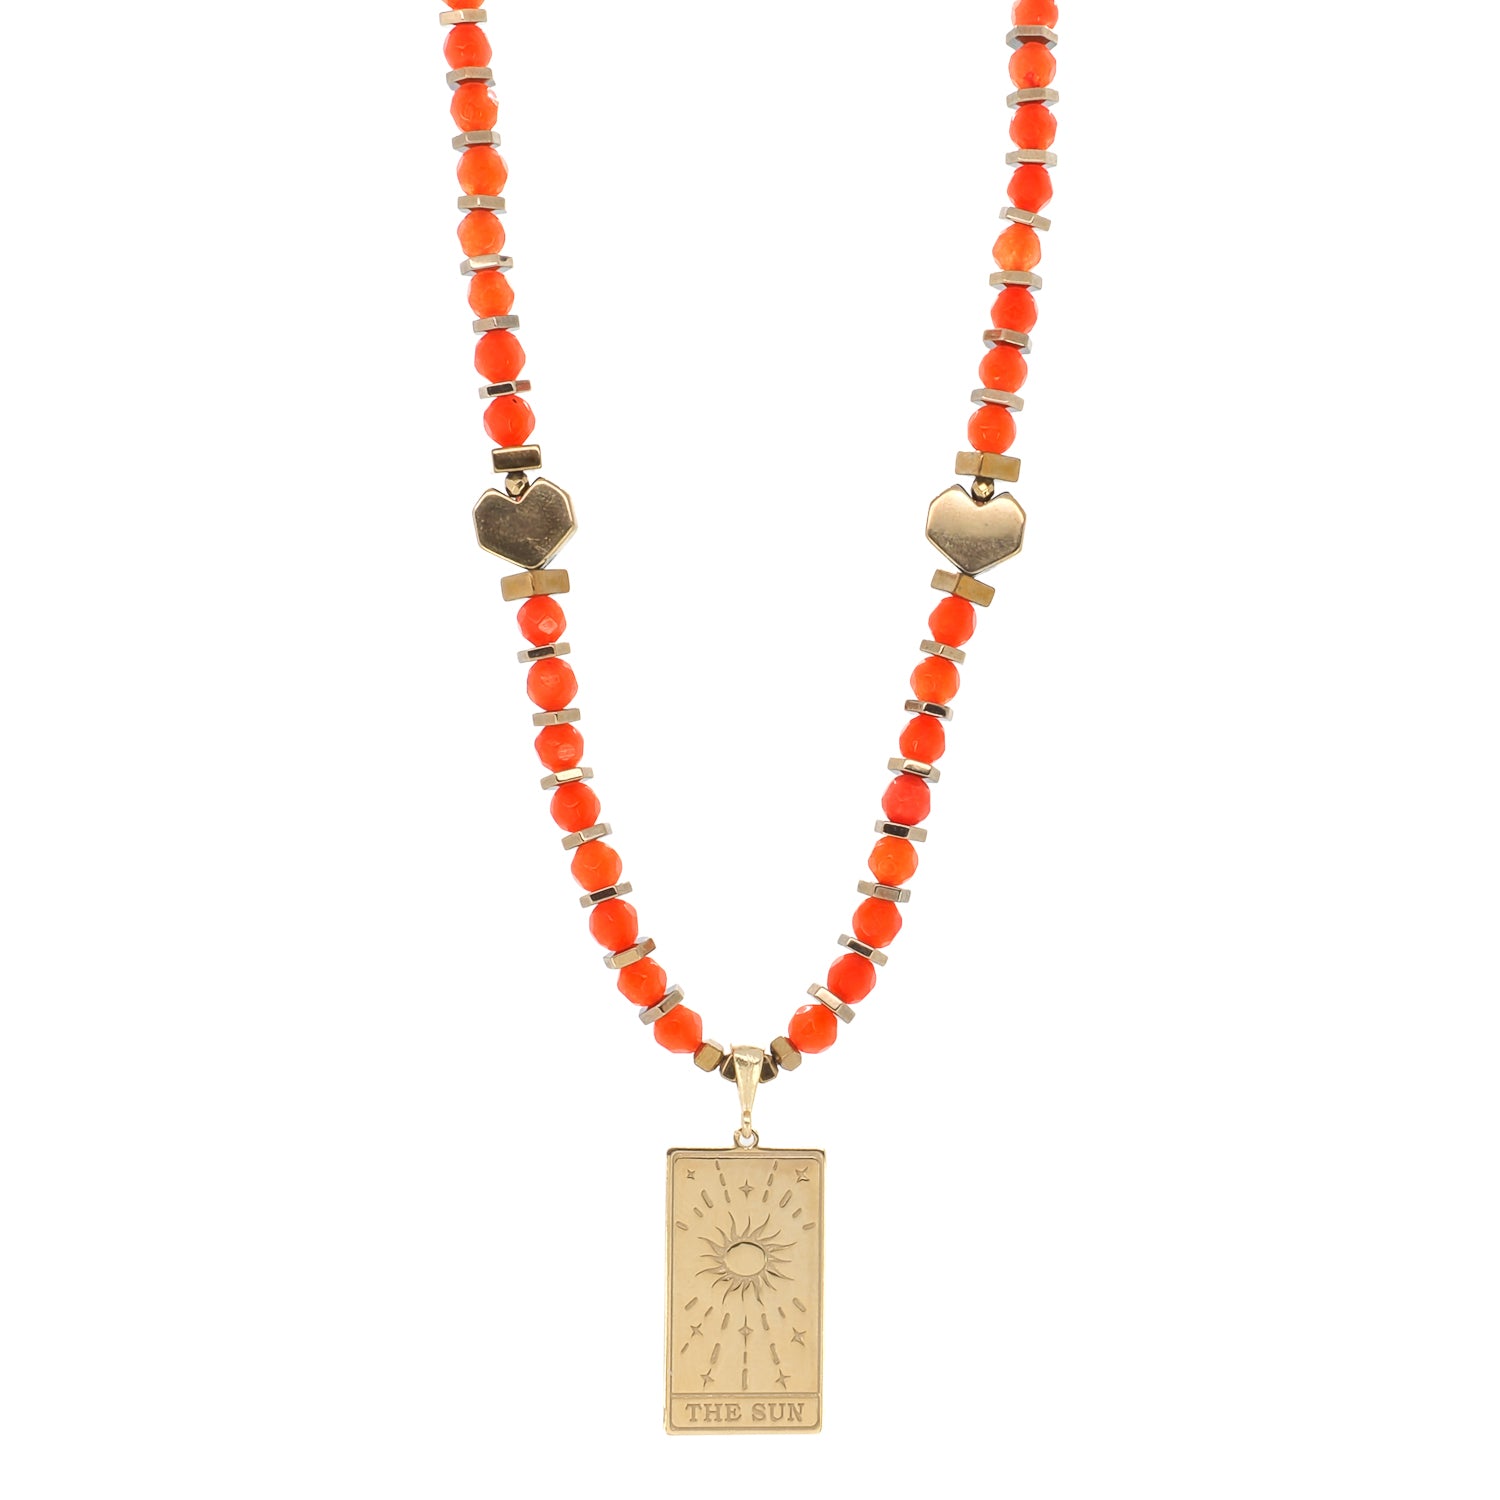 Sun Tarot Pendant Necklace with Healing Agate Beads: Embrace positivity and vitality